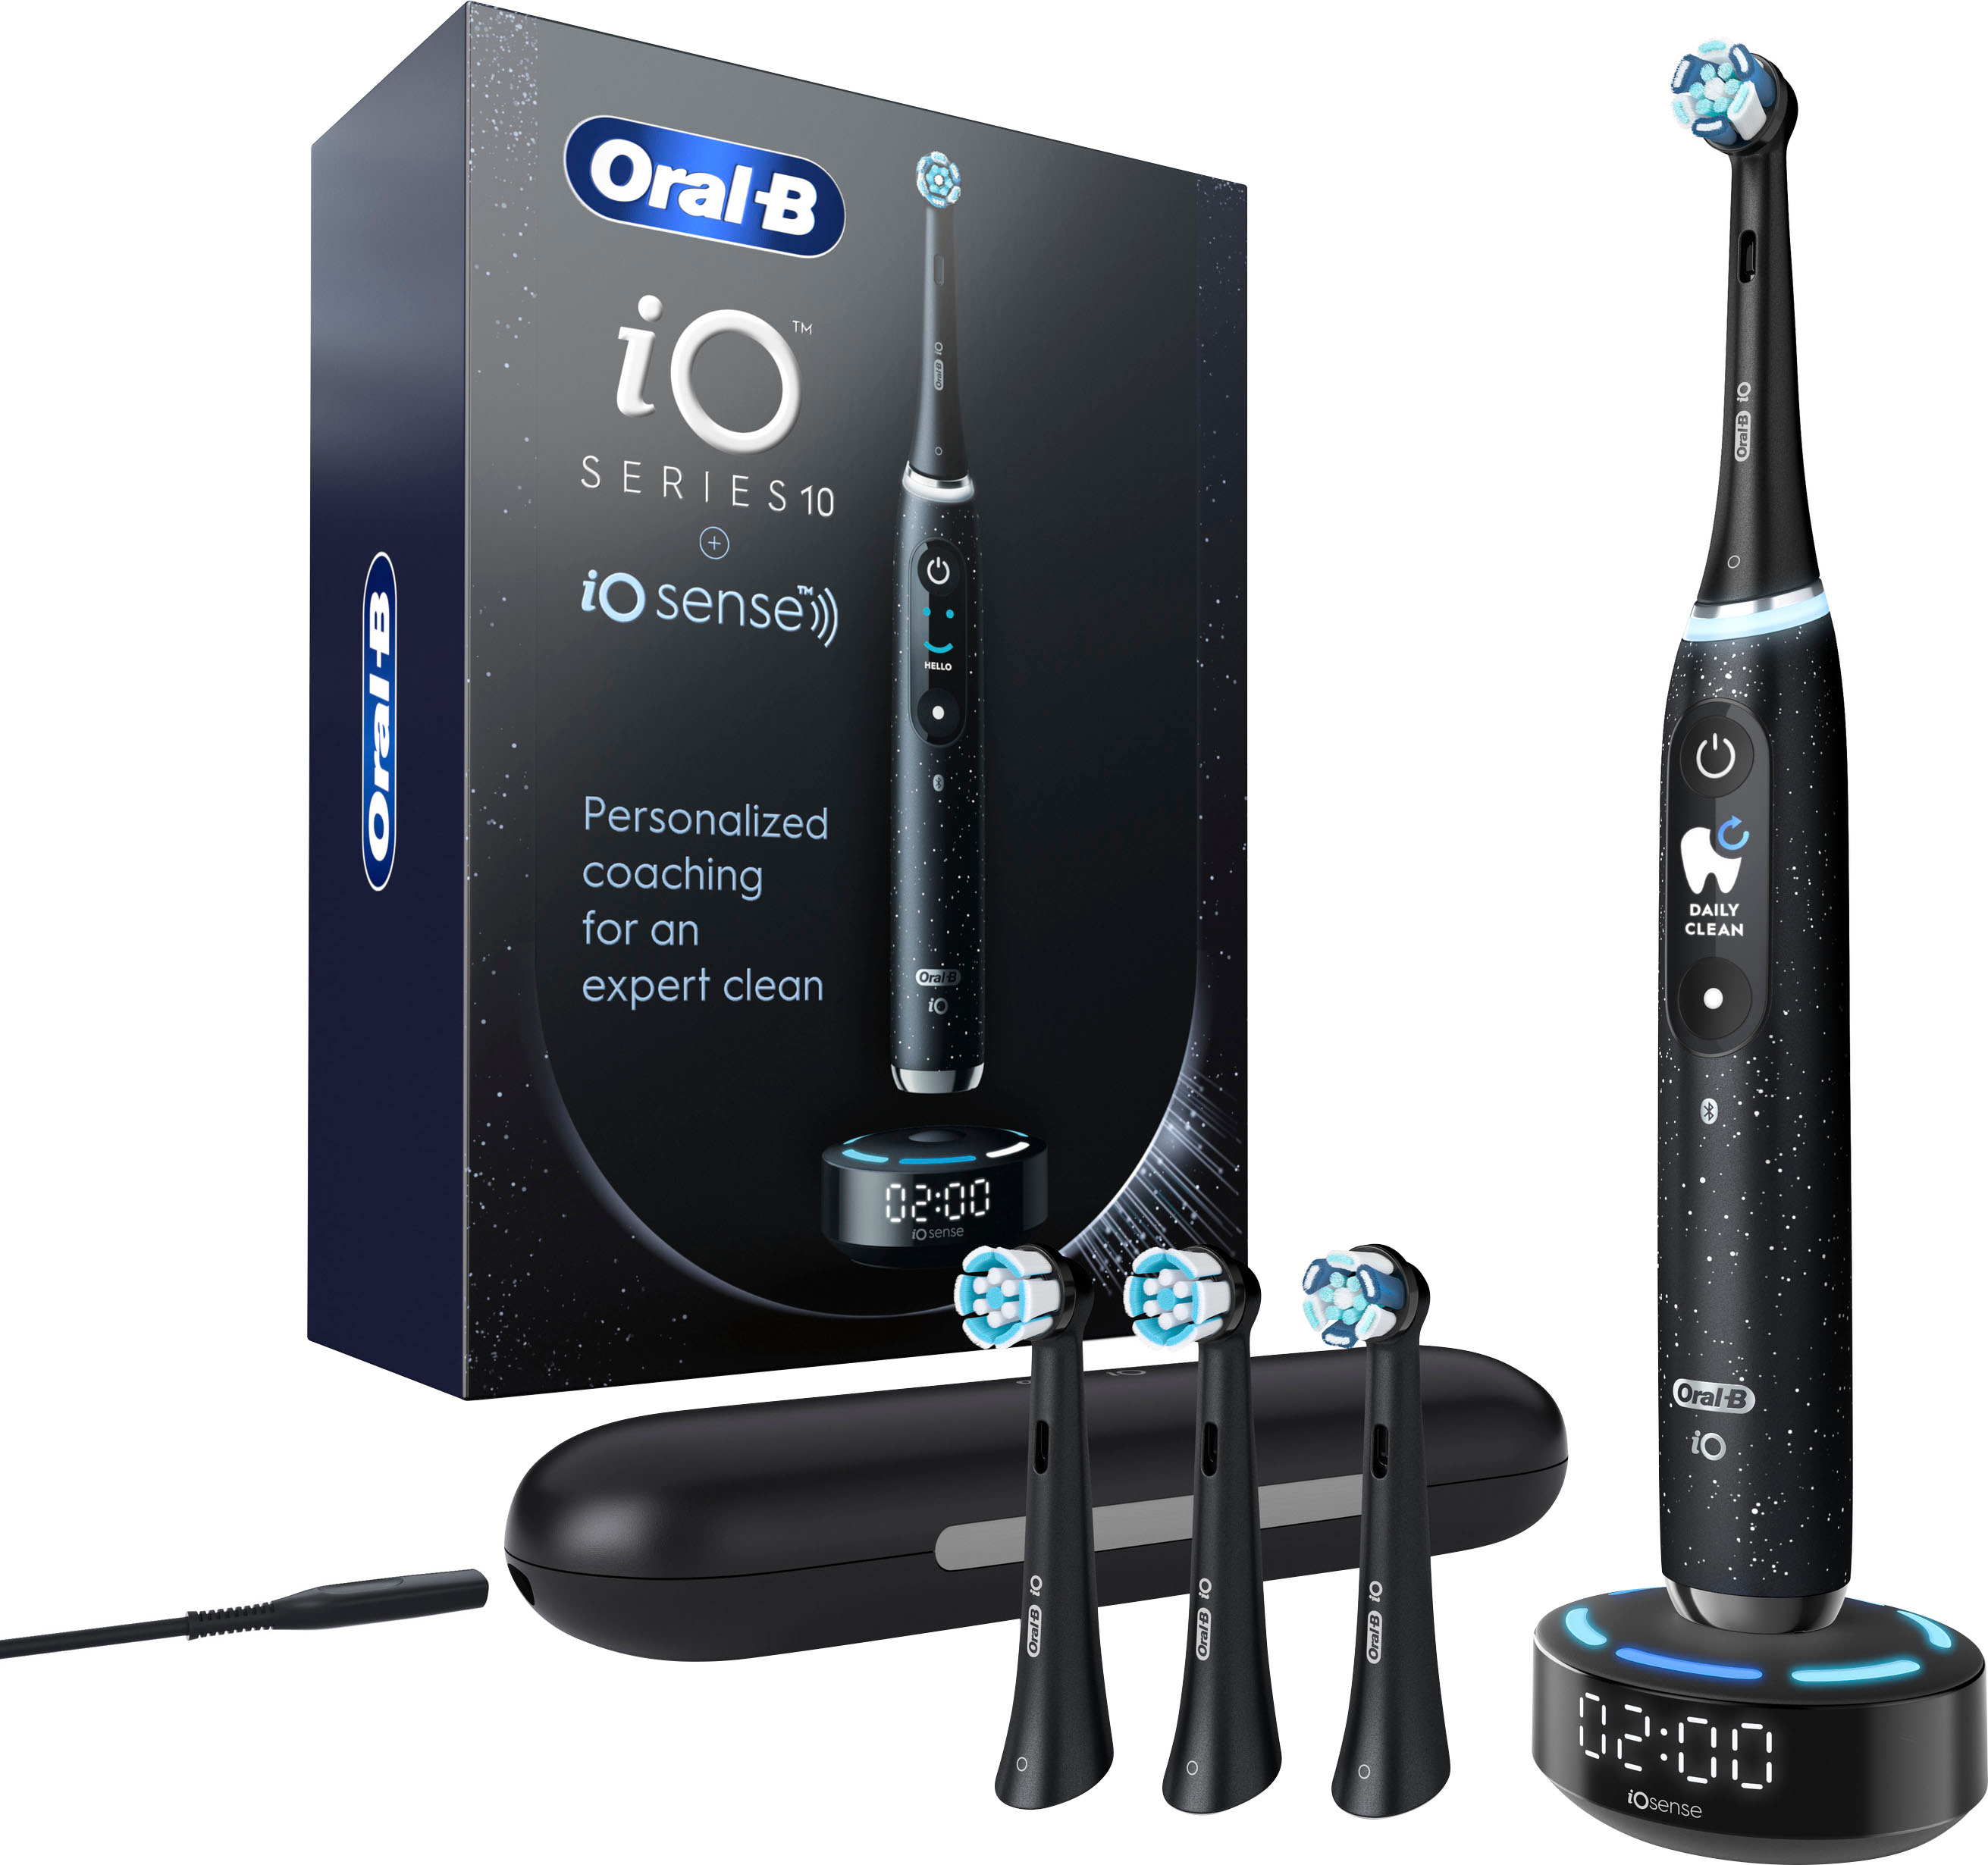 Oral-B - IO Series 10 Rechargeable Electric Toothbrush - Black